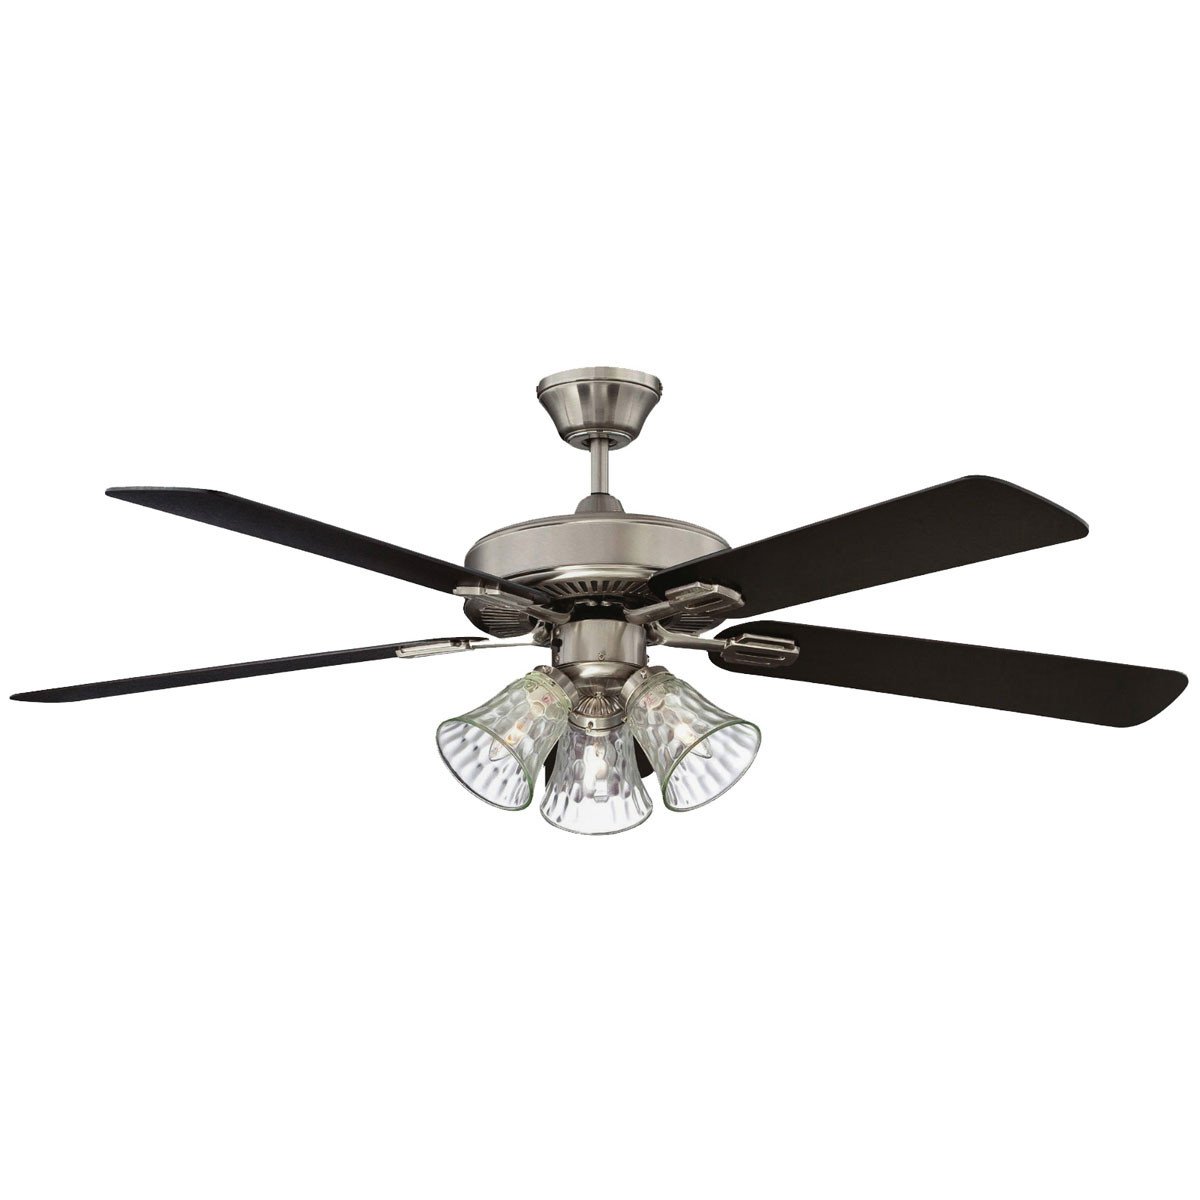 Concord Fans 52" Richmond Stainless Steel Finish Ceiling Fan with 3 Lights